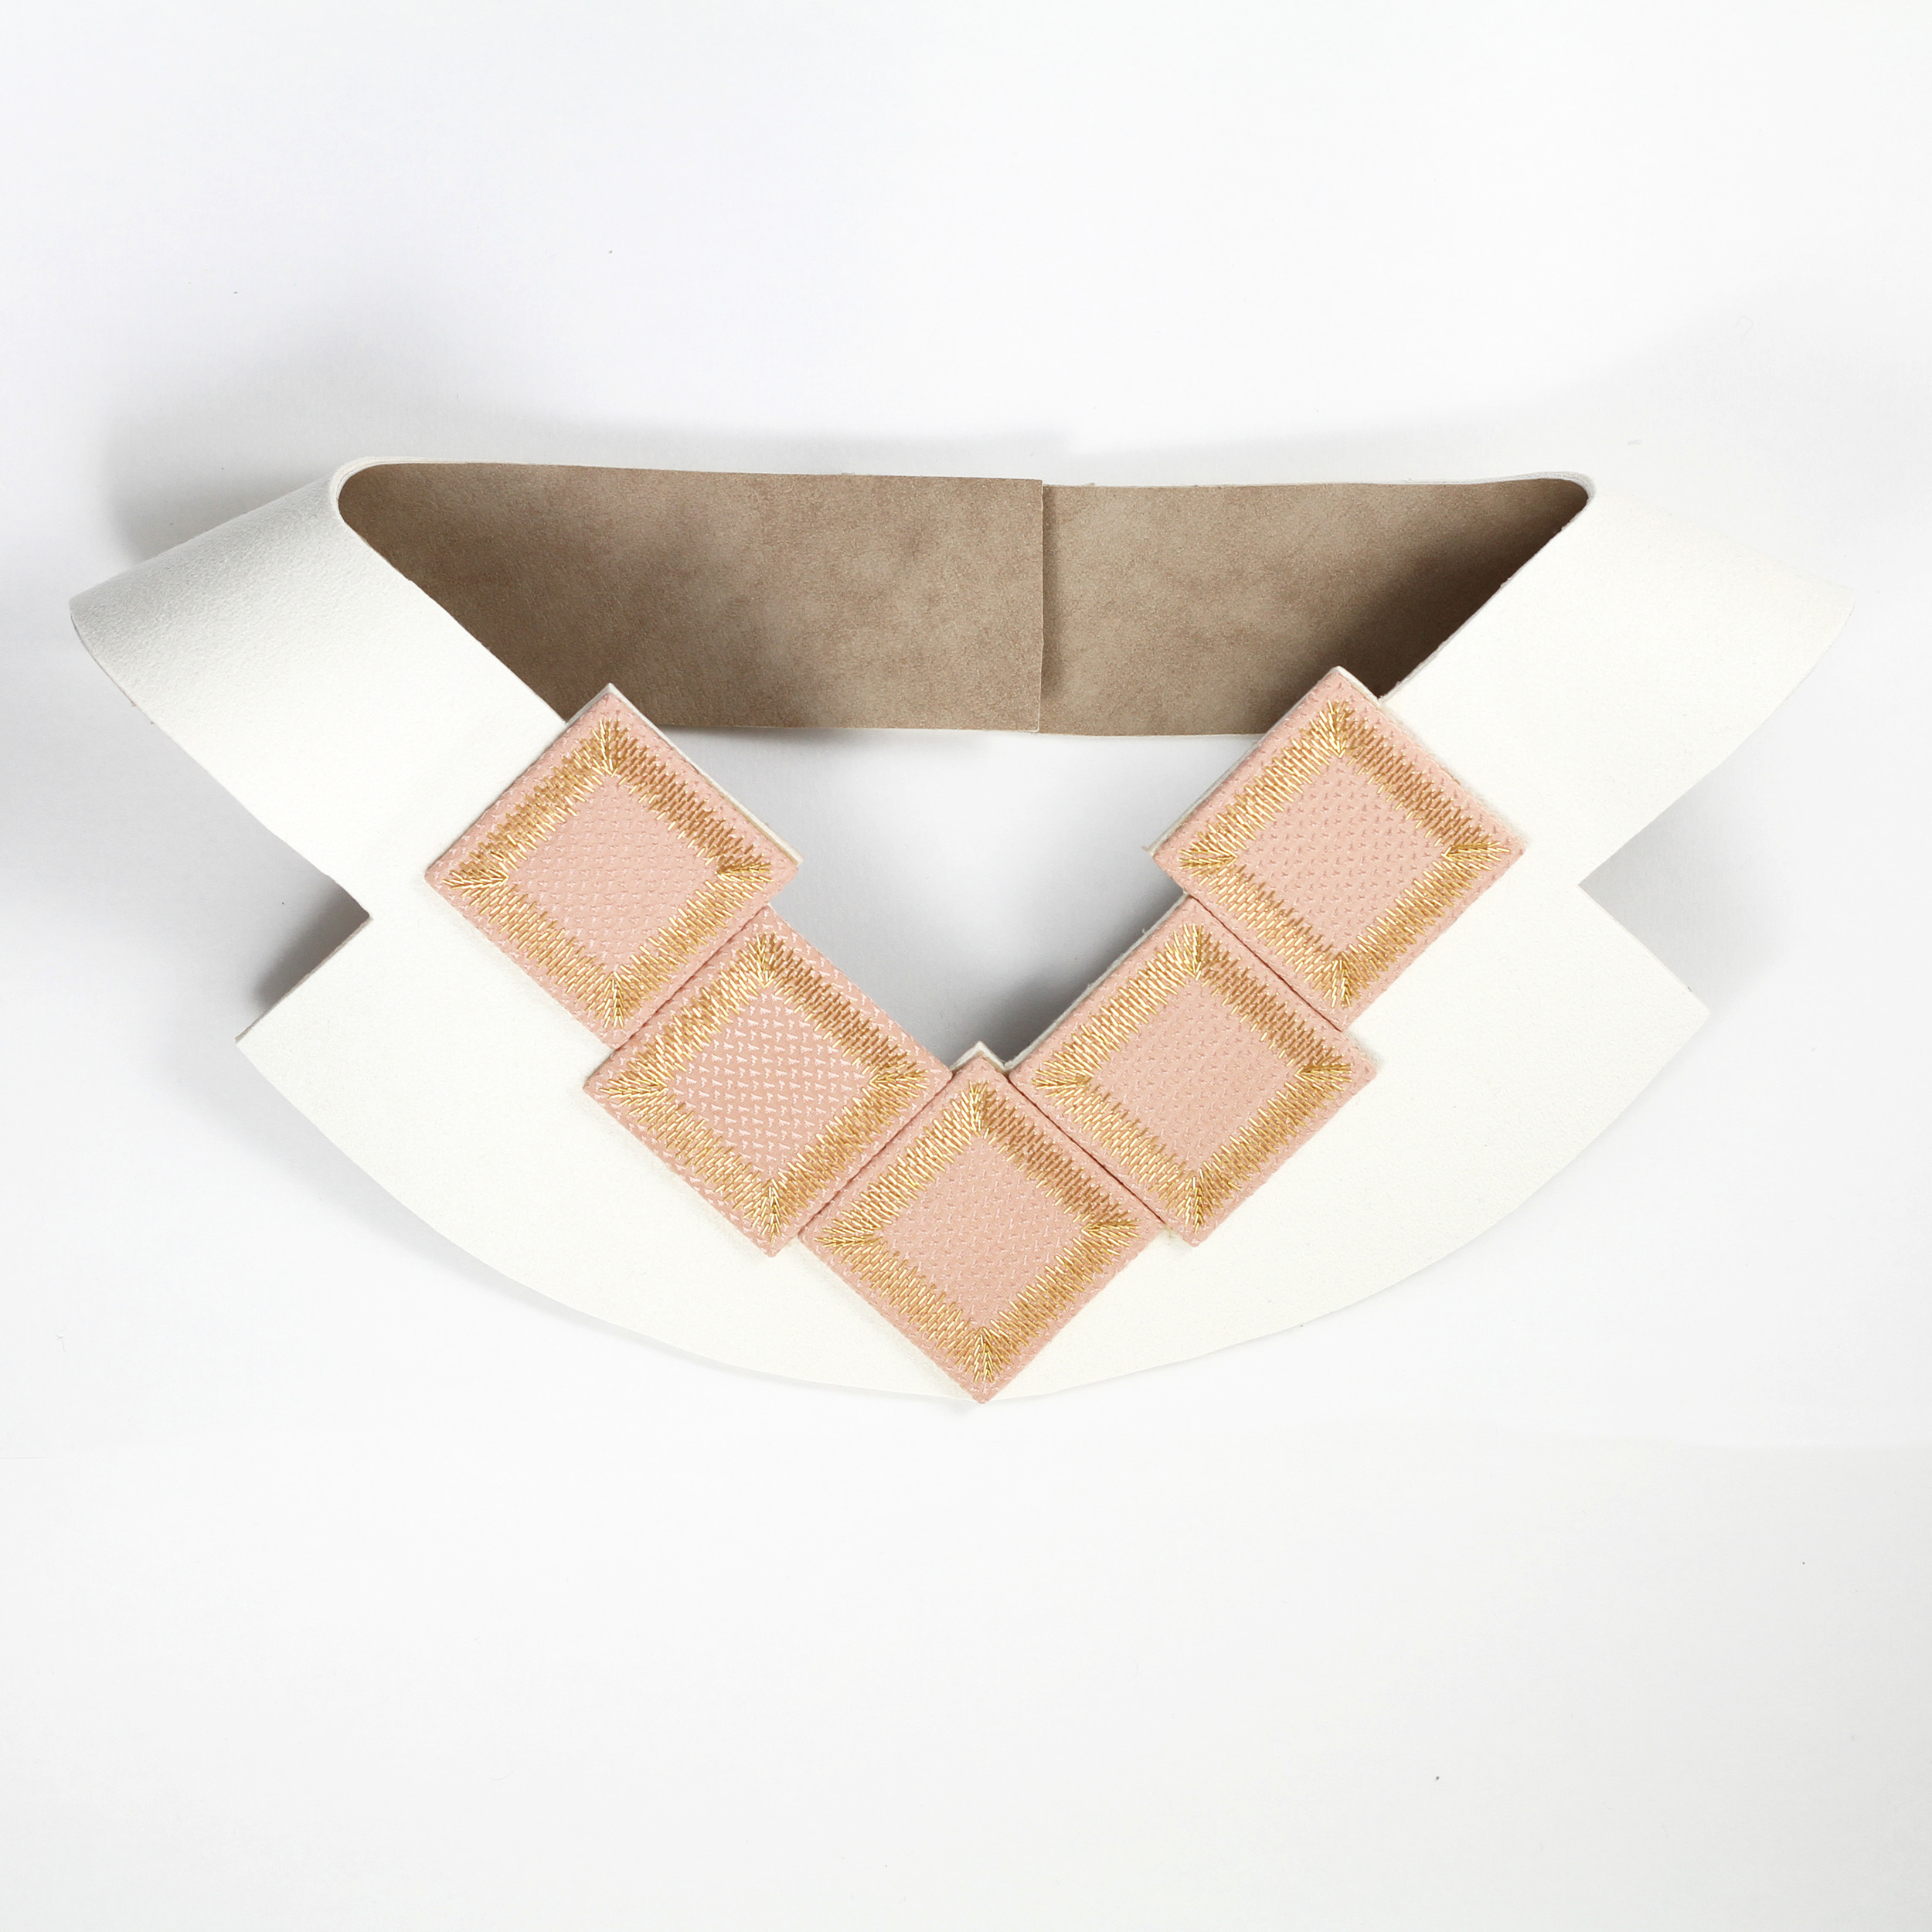 Kosmos-Collection-Isabel-Wong-Coral-Pink-Silk-White-Suede-Gold-Metal-Bib-Necklace-Consequence.JPG